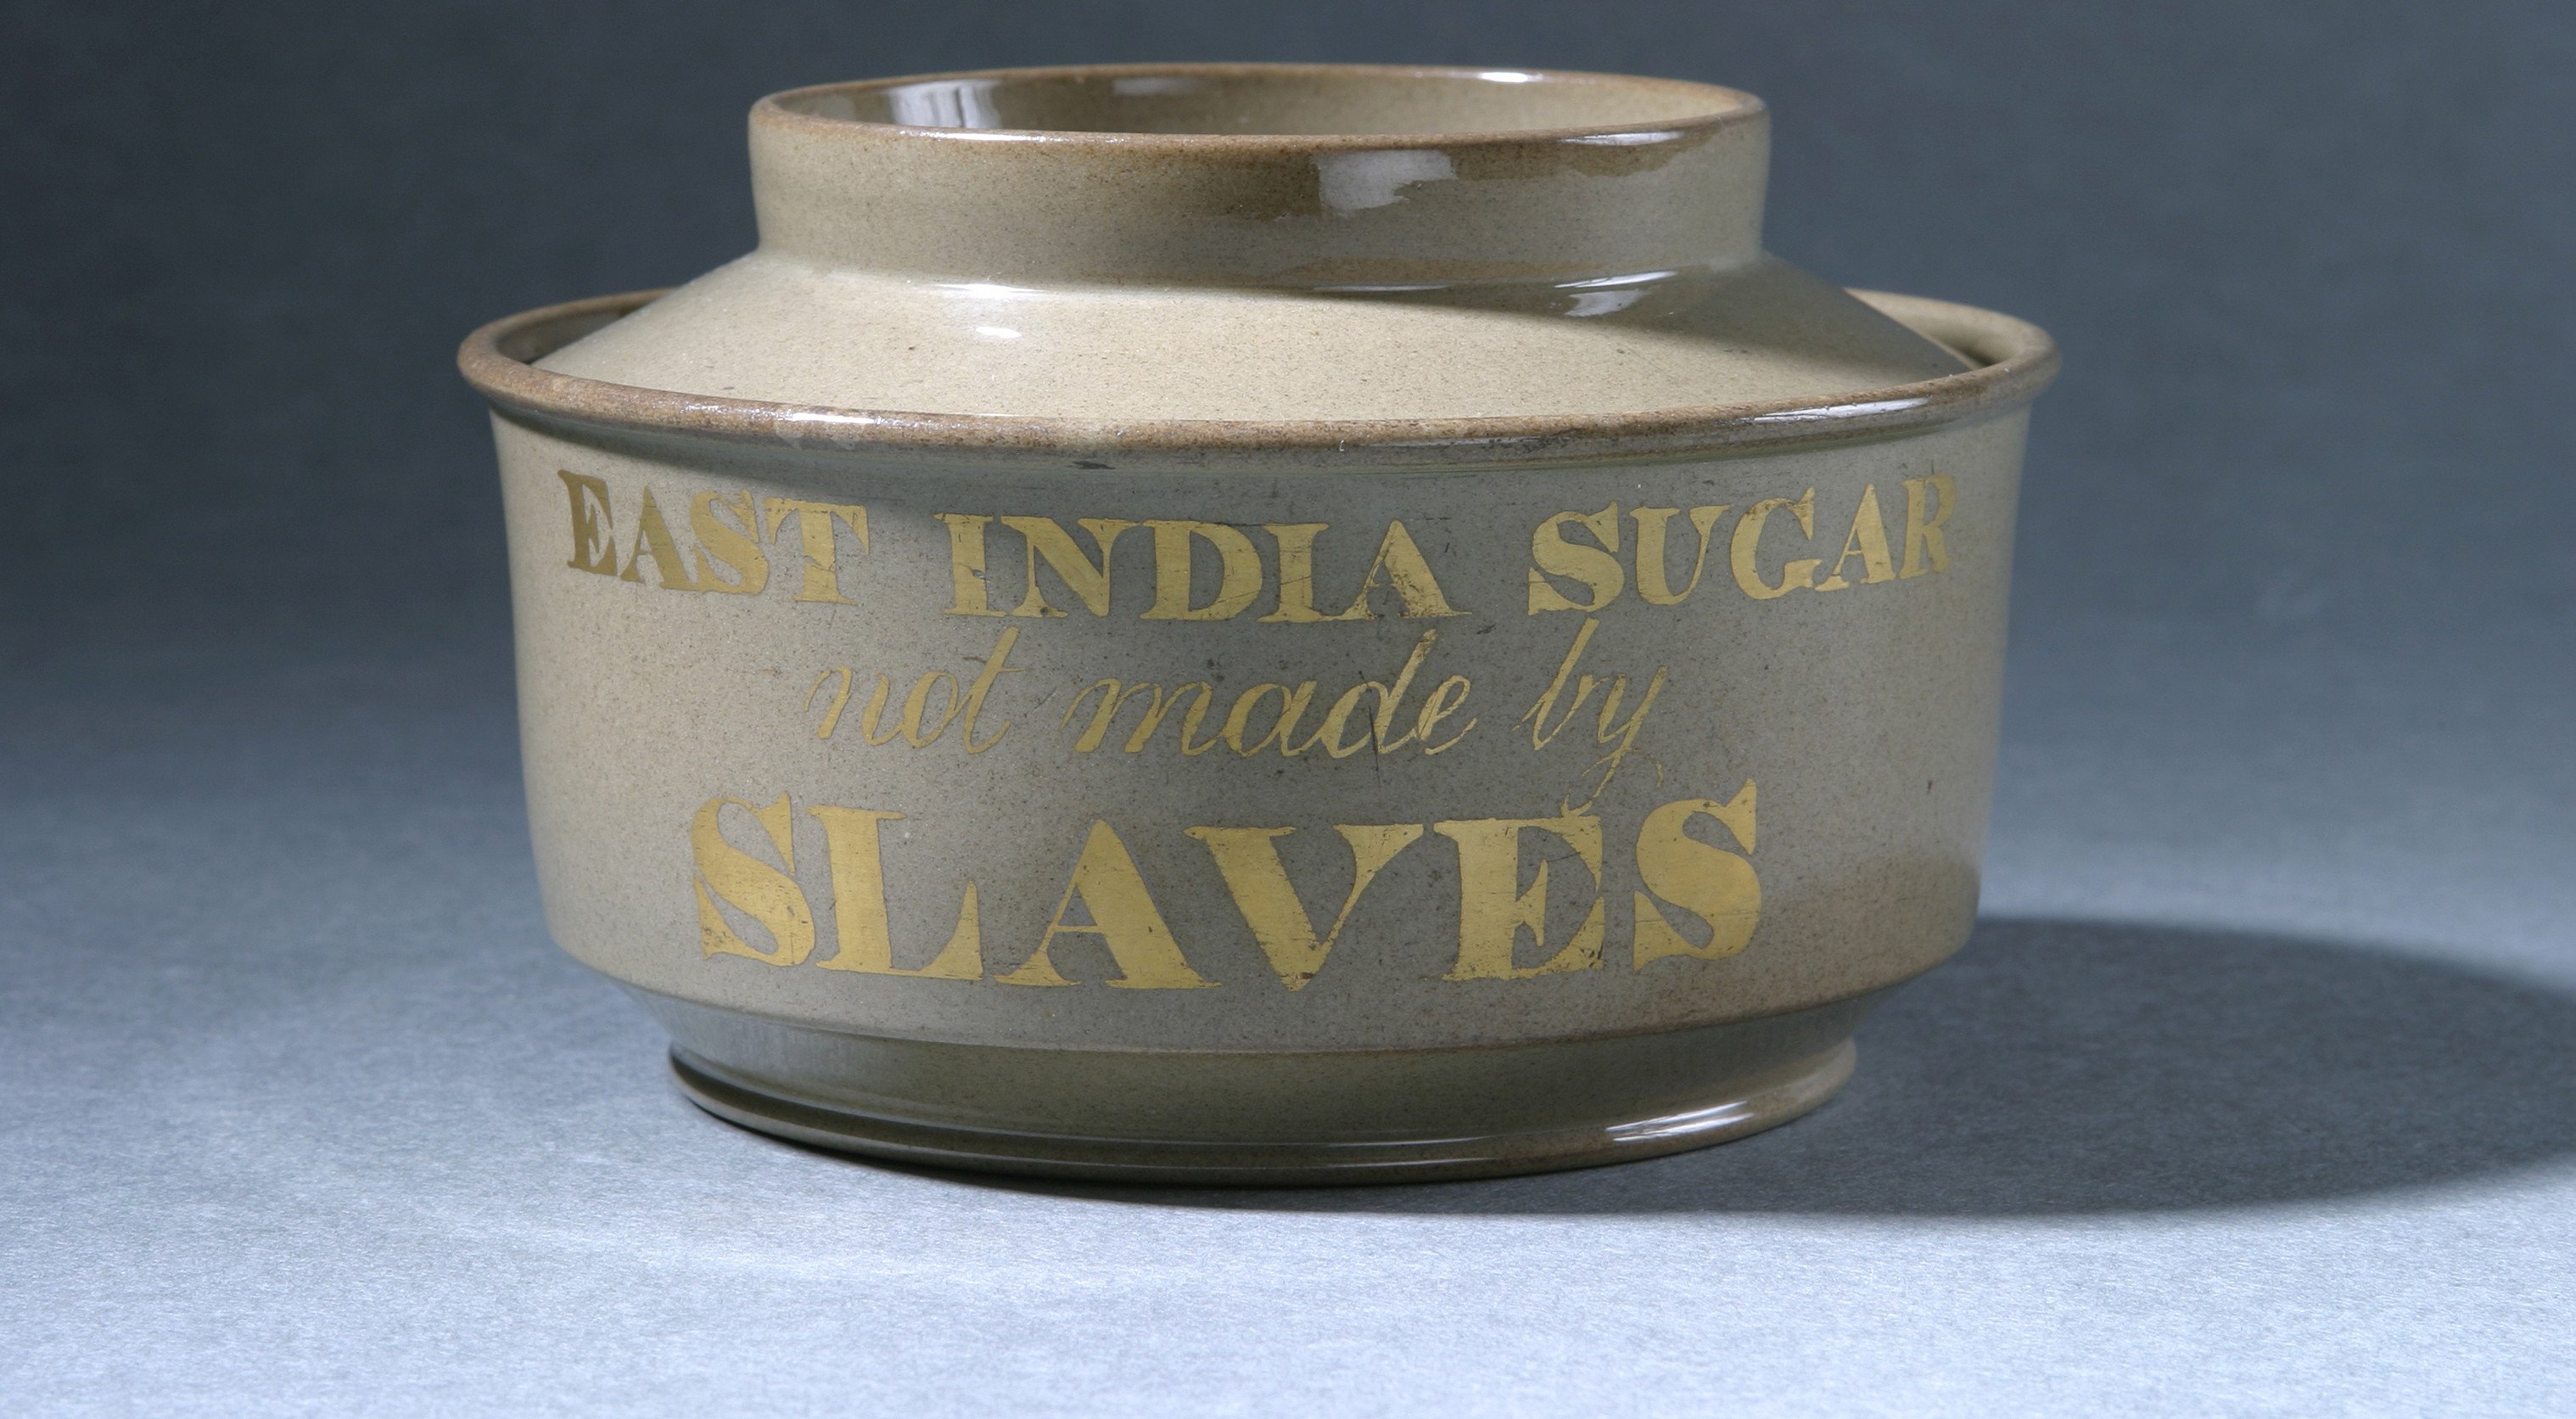 Sugar bowl with gold inscription "East India sugar not made by slaves".